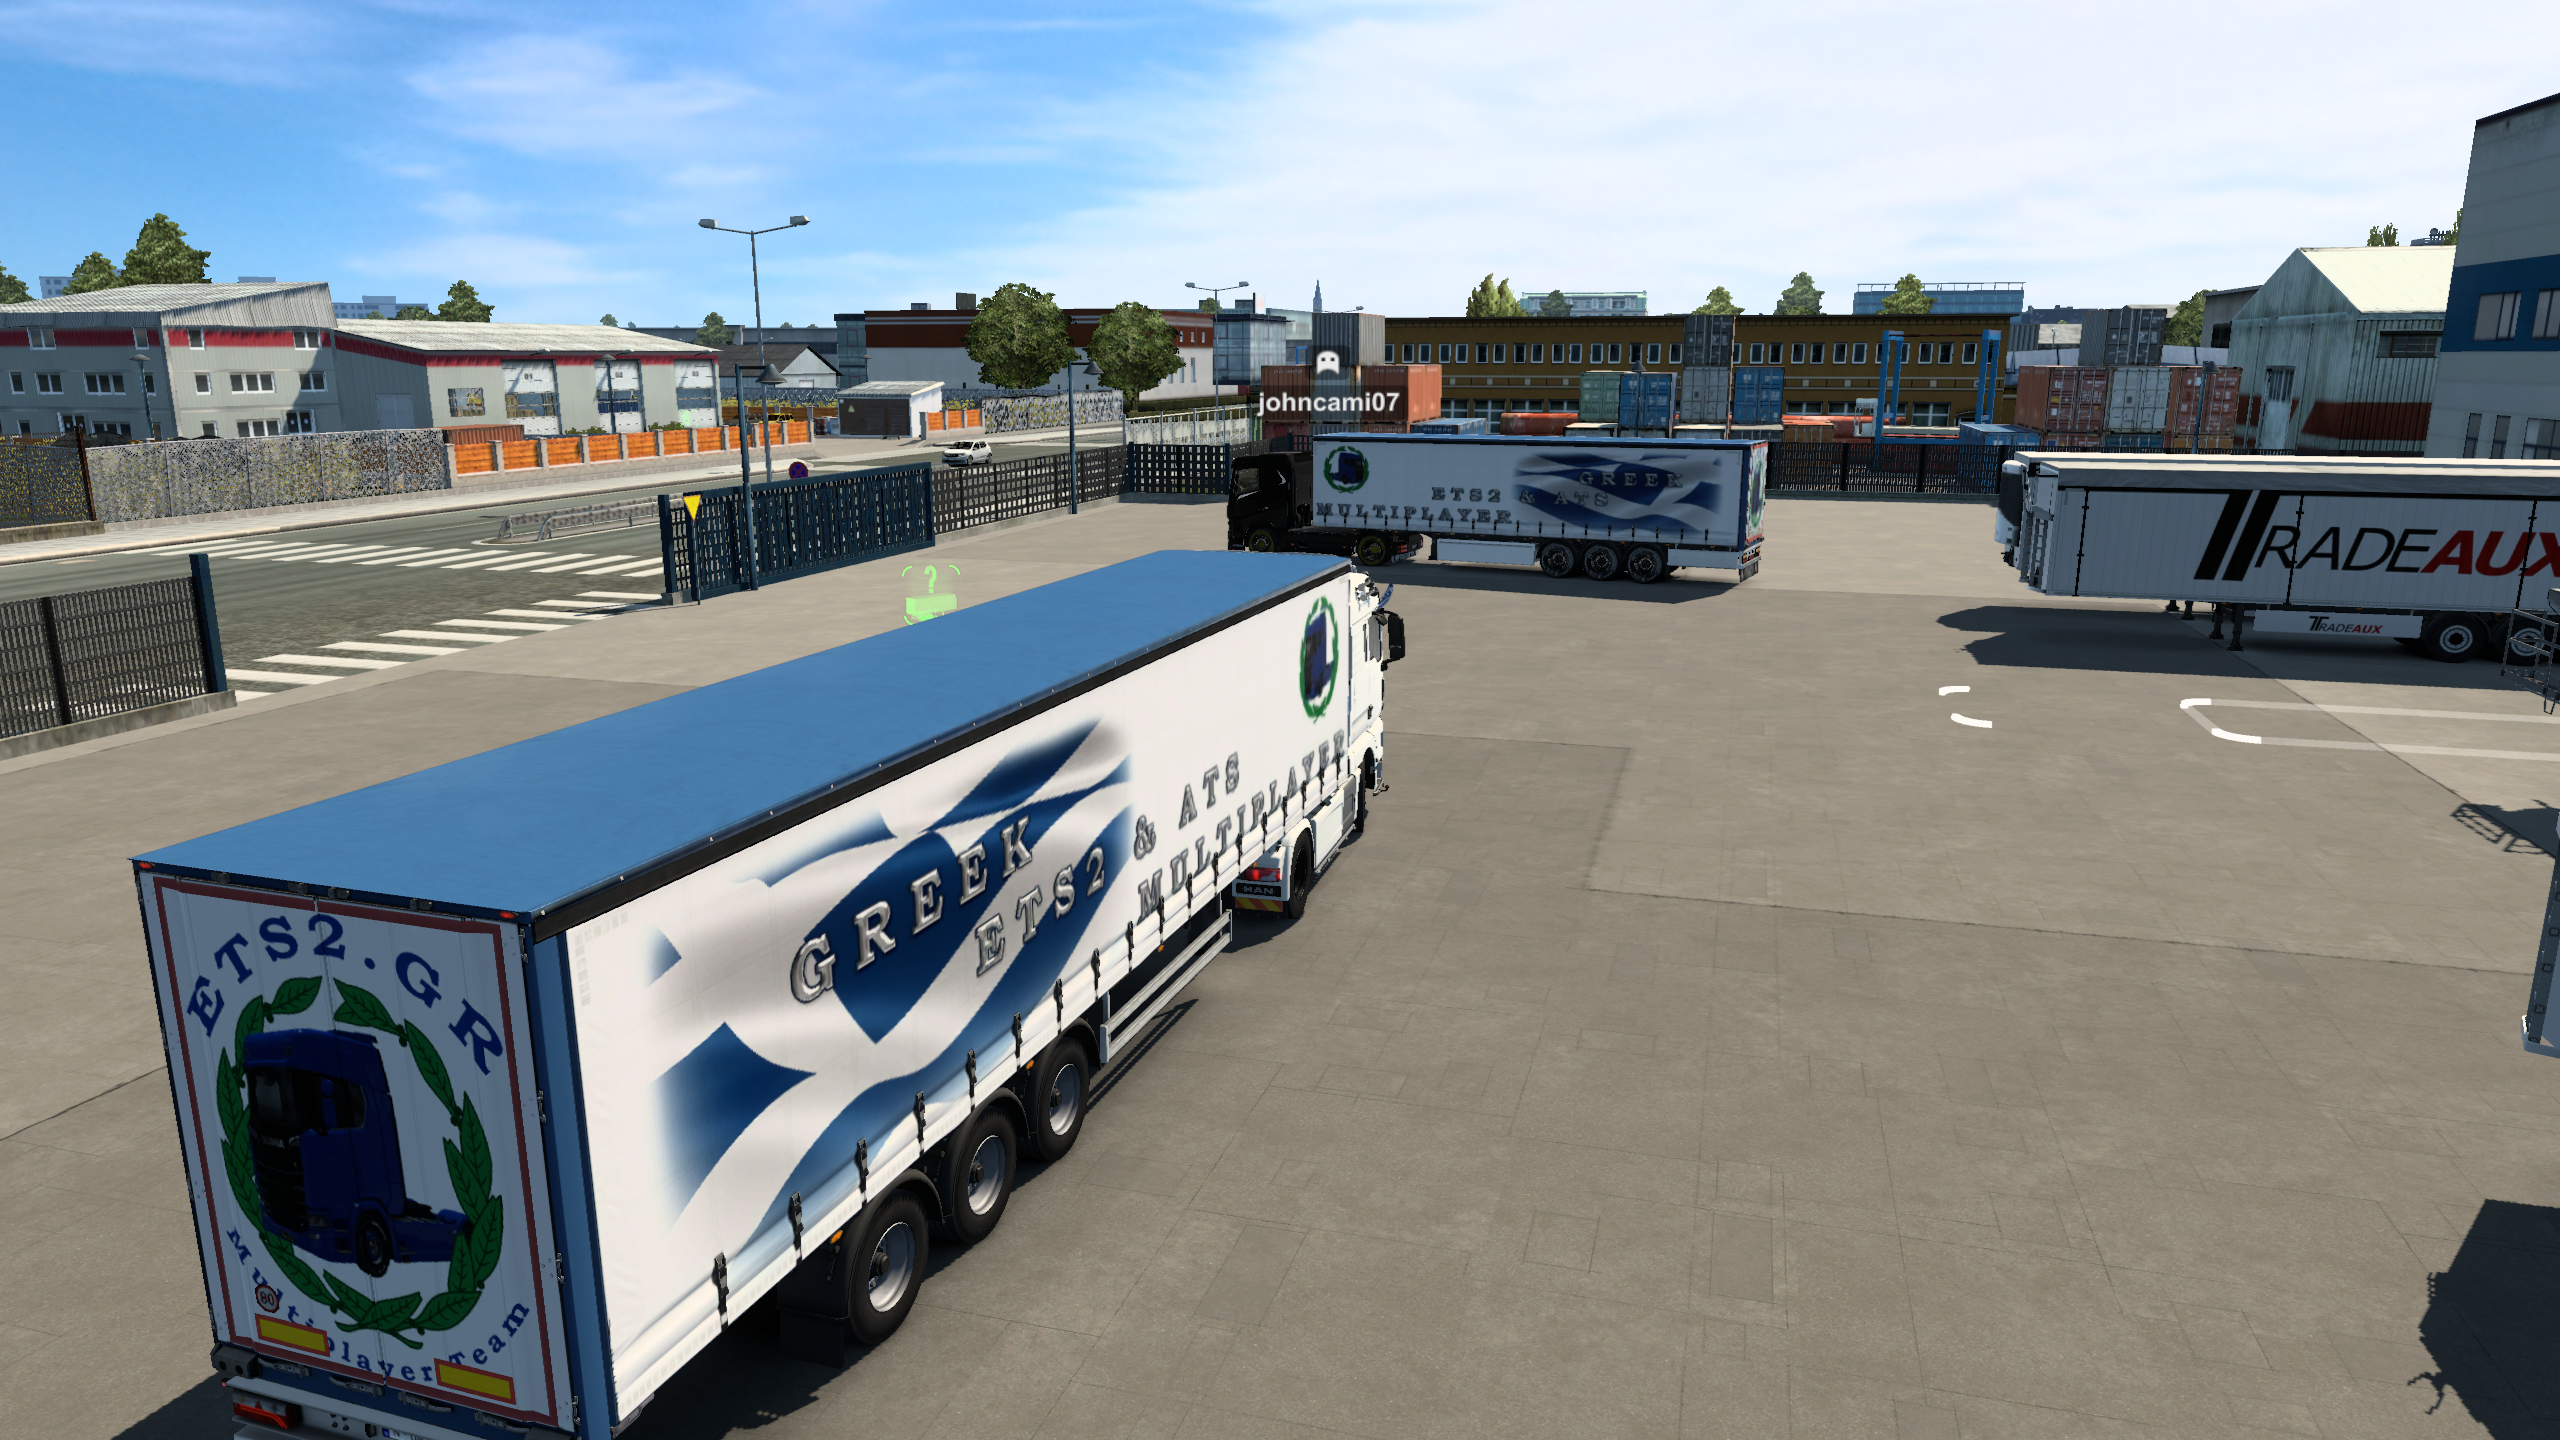 ets2_20220306_232058_00.png